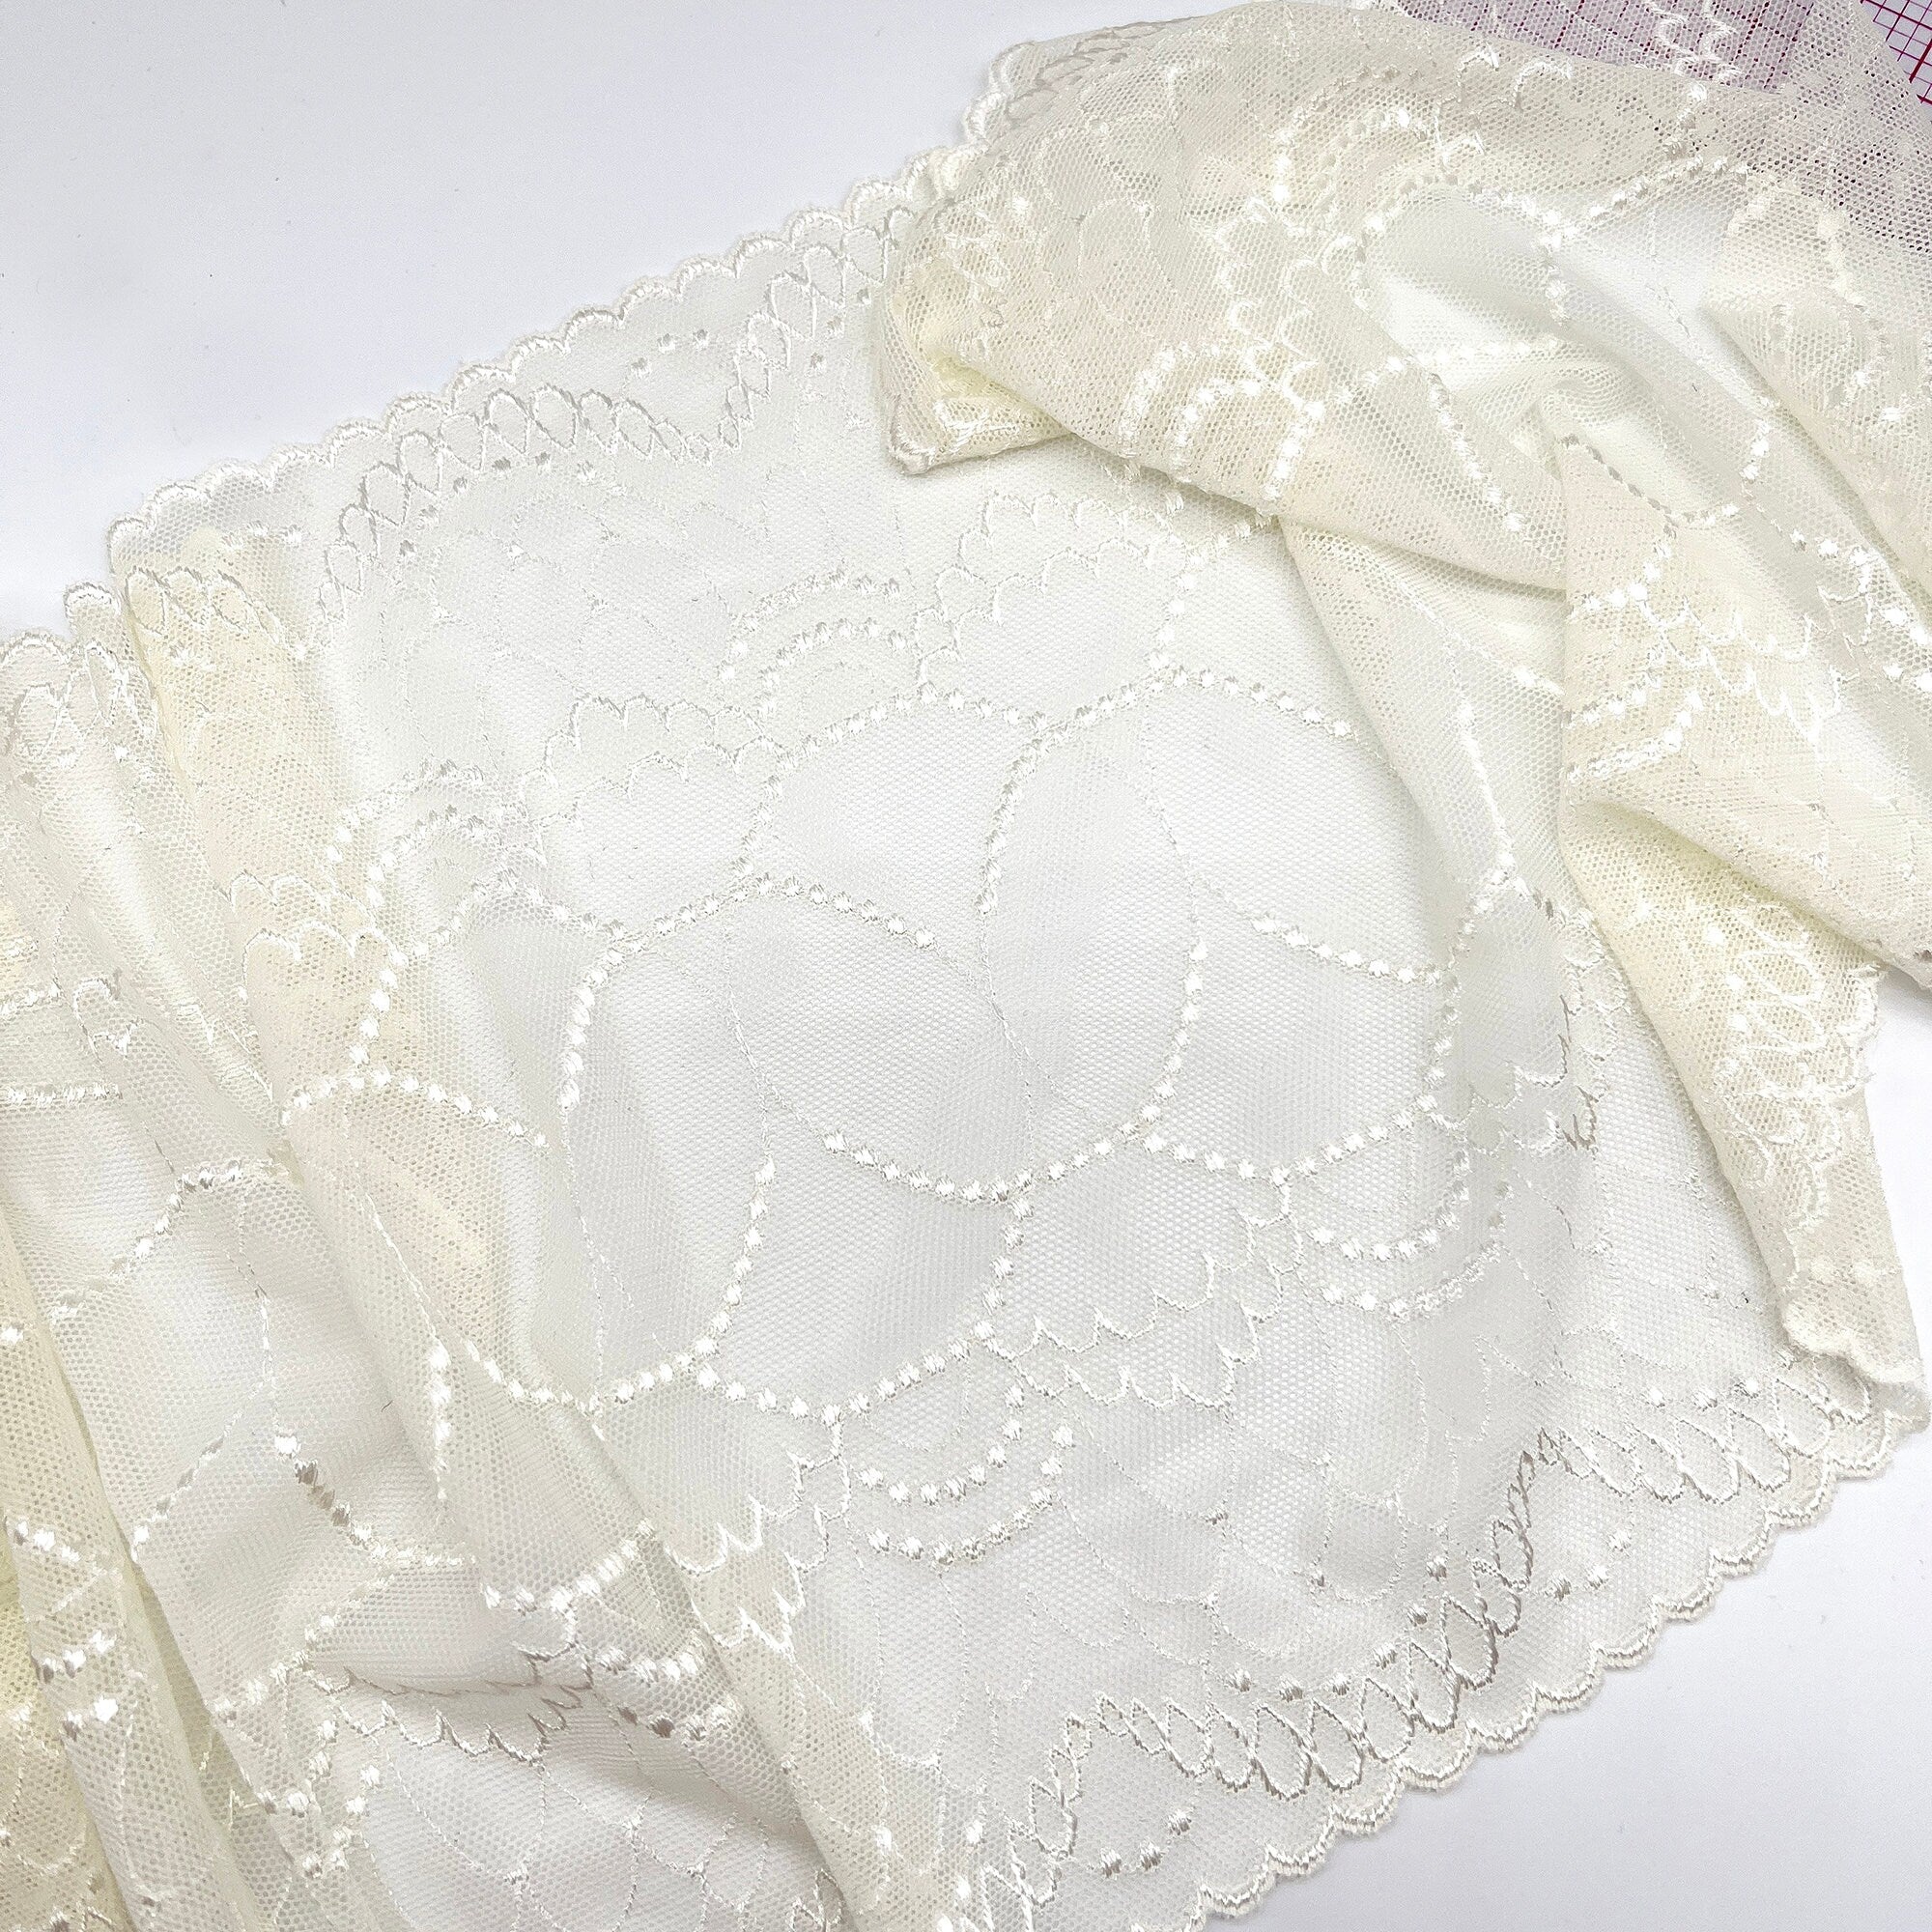 9.5" (24cm) Wide, Delicate Stretch Lace in Light Sand, Ivory, Black and White - 1 Yard - Stitch Love Studio